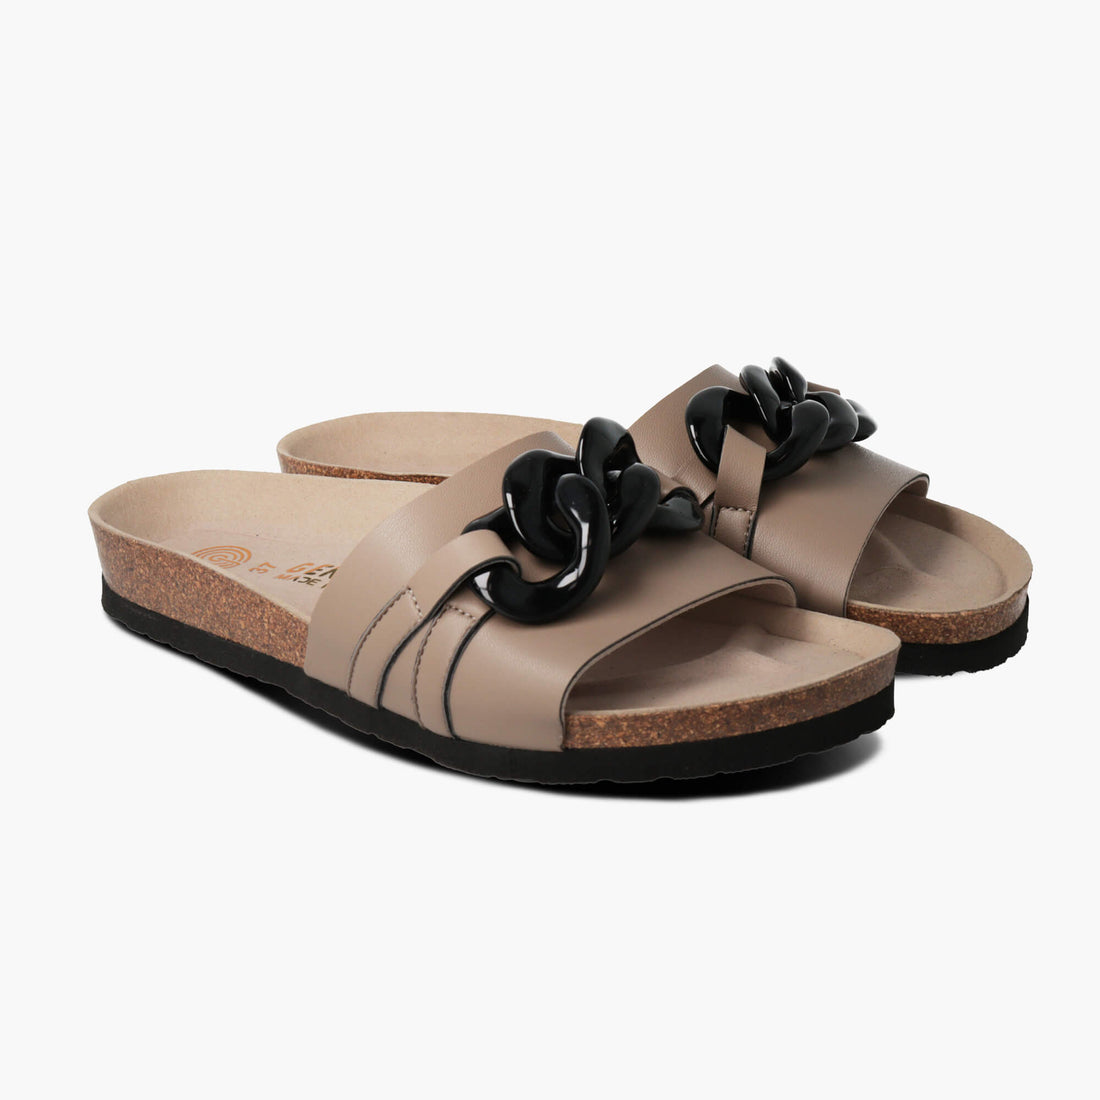 Bagatelle Taupe Sandals